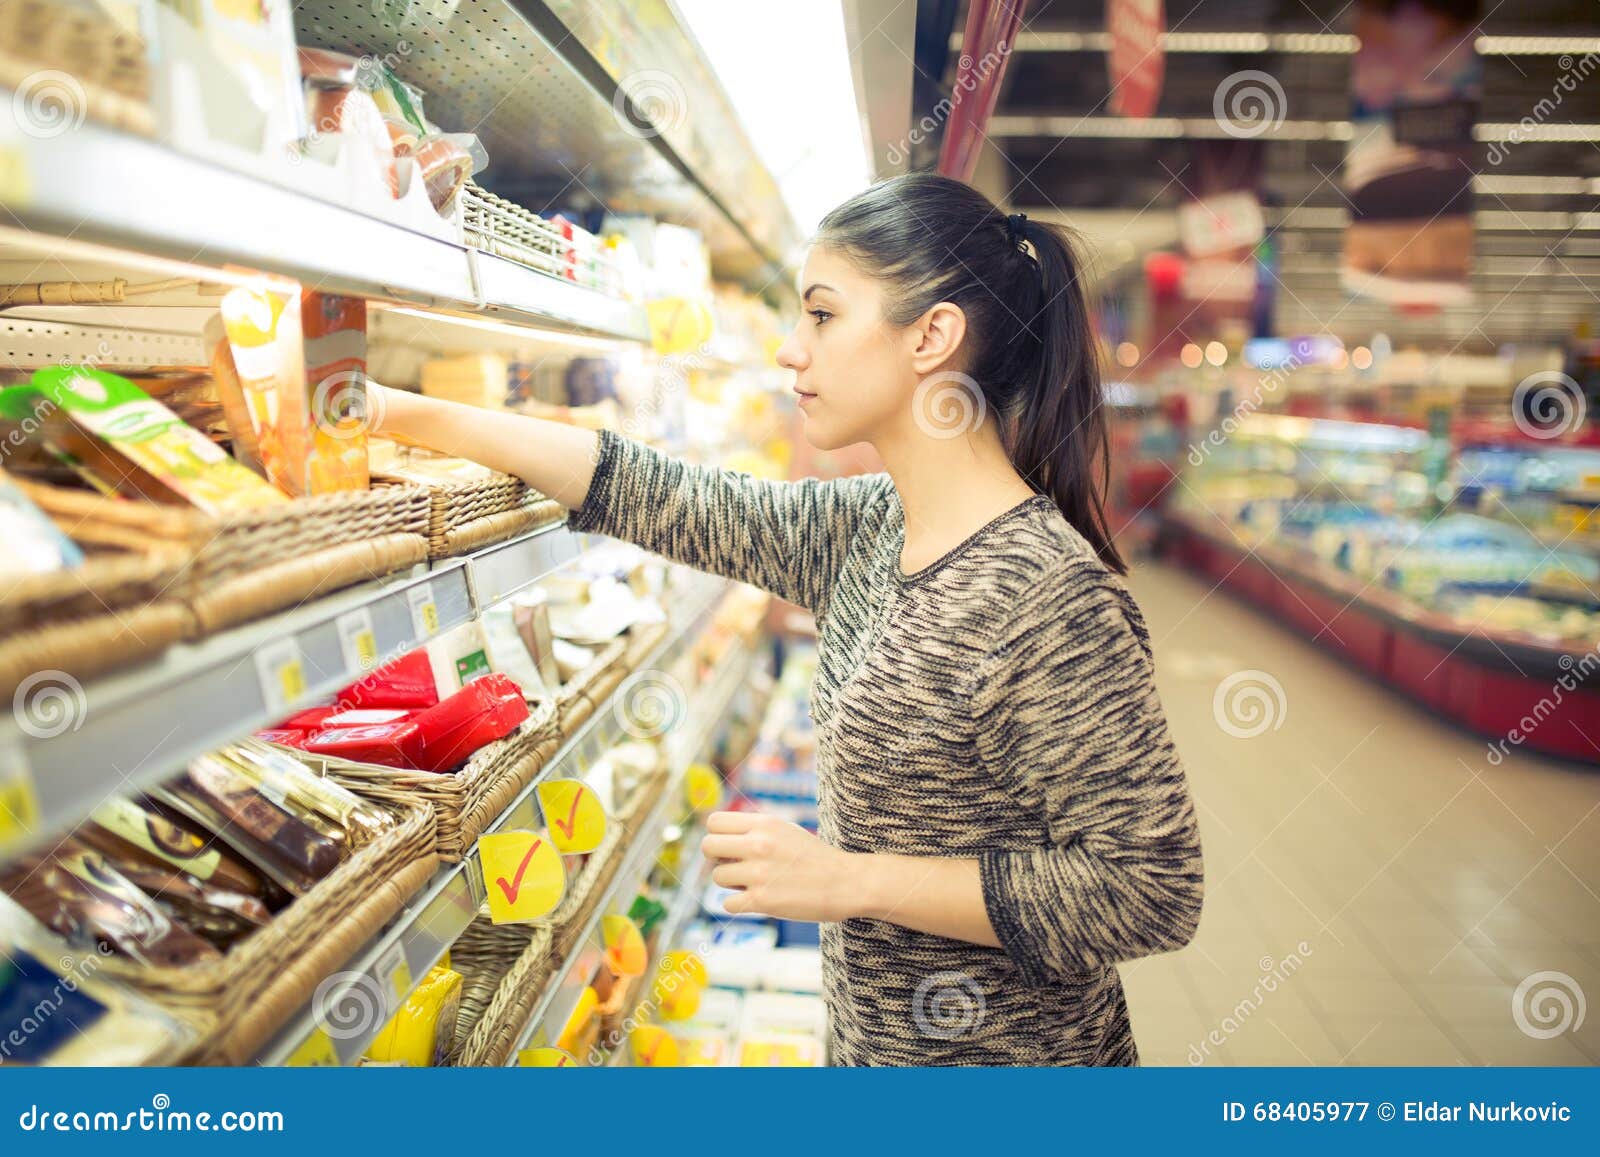 young woman shopping for recipe ingredients in a large supermarket.shopping for groceries,household,health and beauty.self service